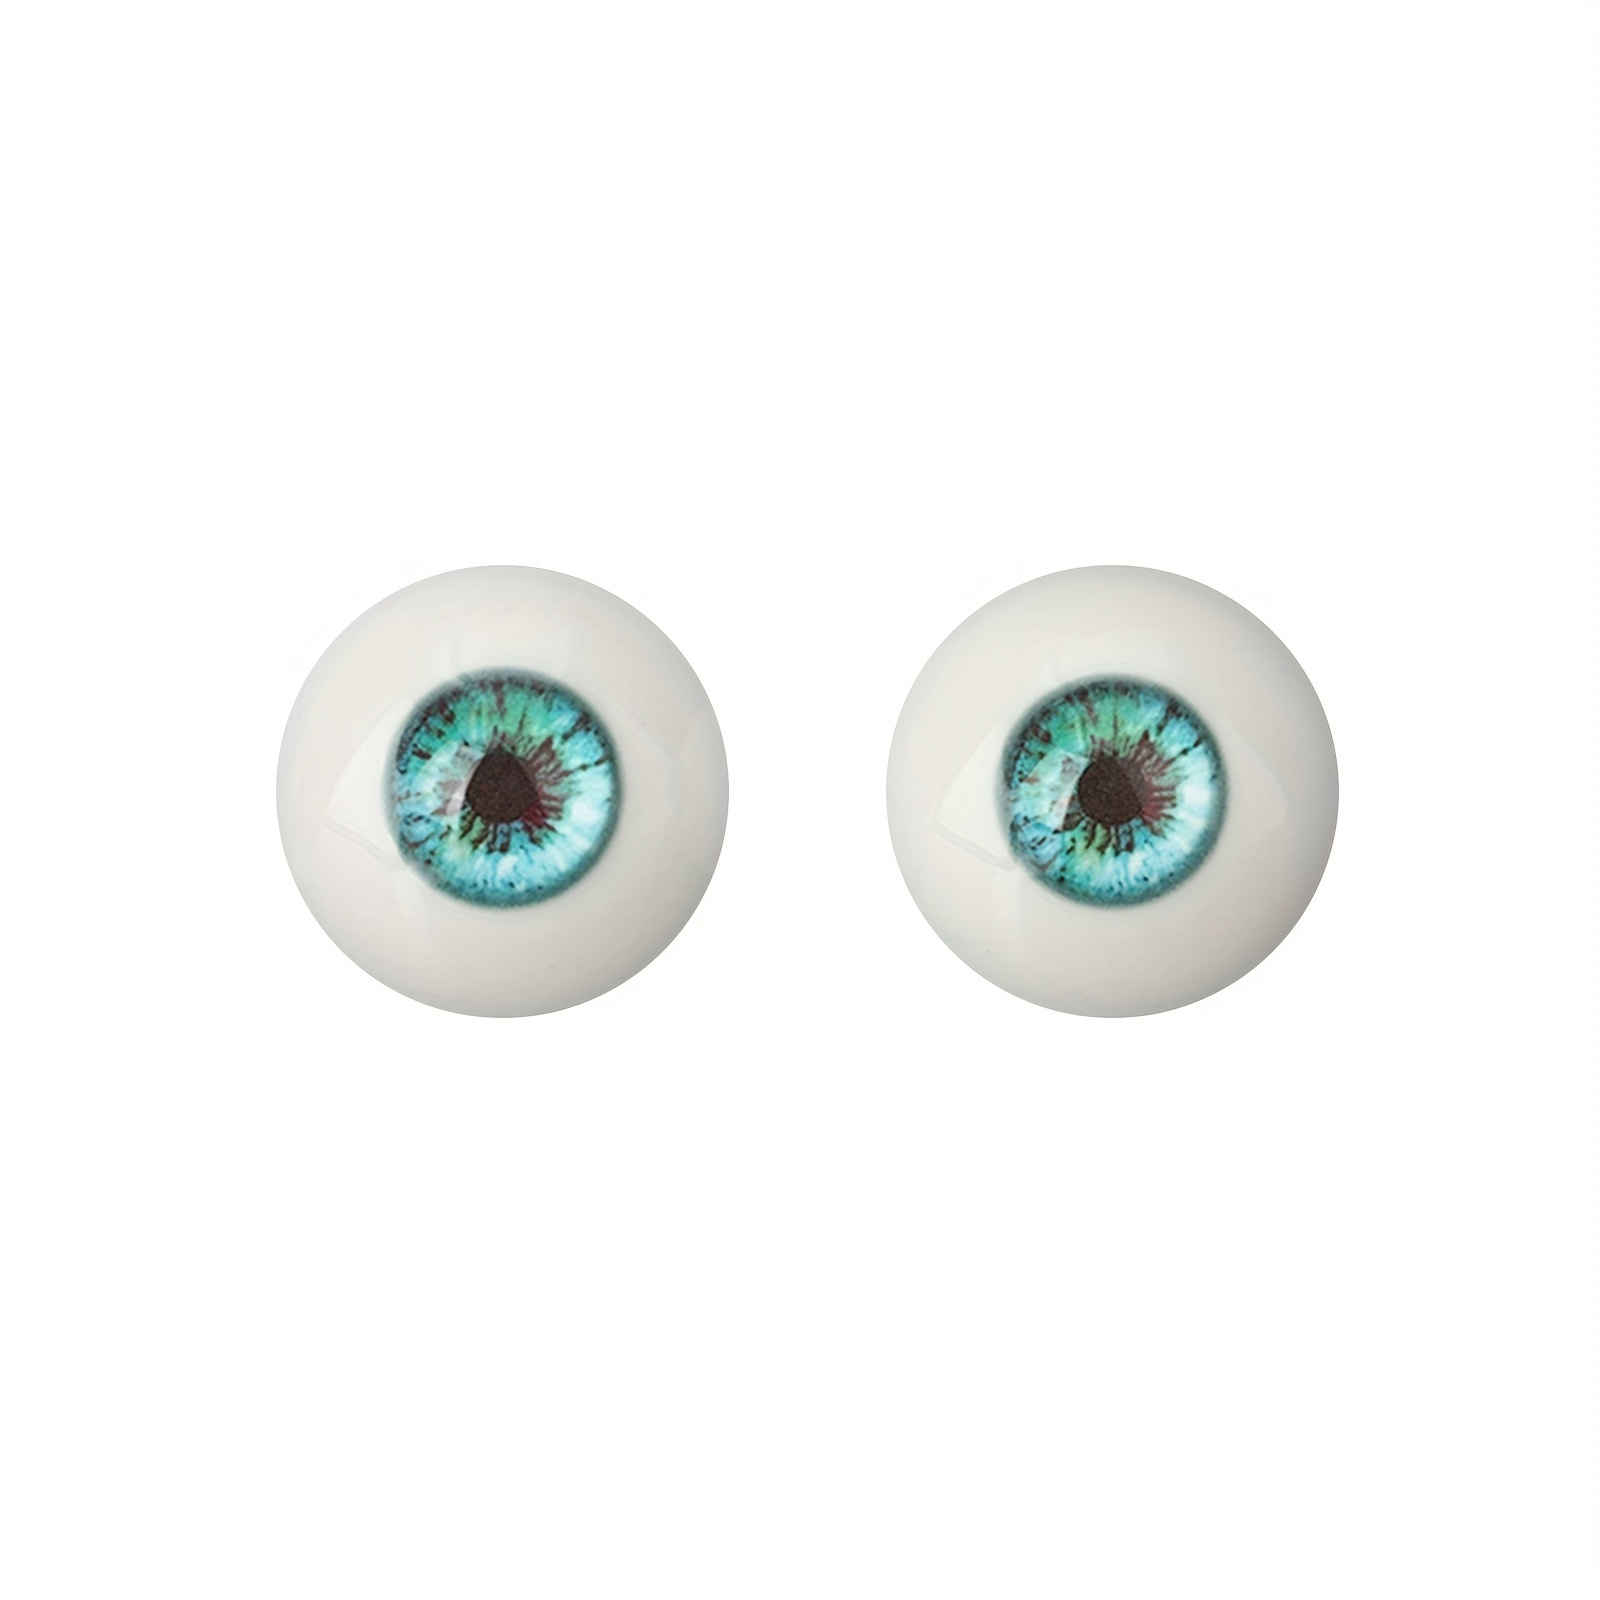 LIFANOU Half Round Eyeballs 33mm - 4 Pair Realistic Acrylic Fake Eyes for  Halloween Props, Dolls Crafts, Cosplay and Party Decoration (4 Pairs